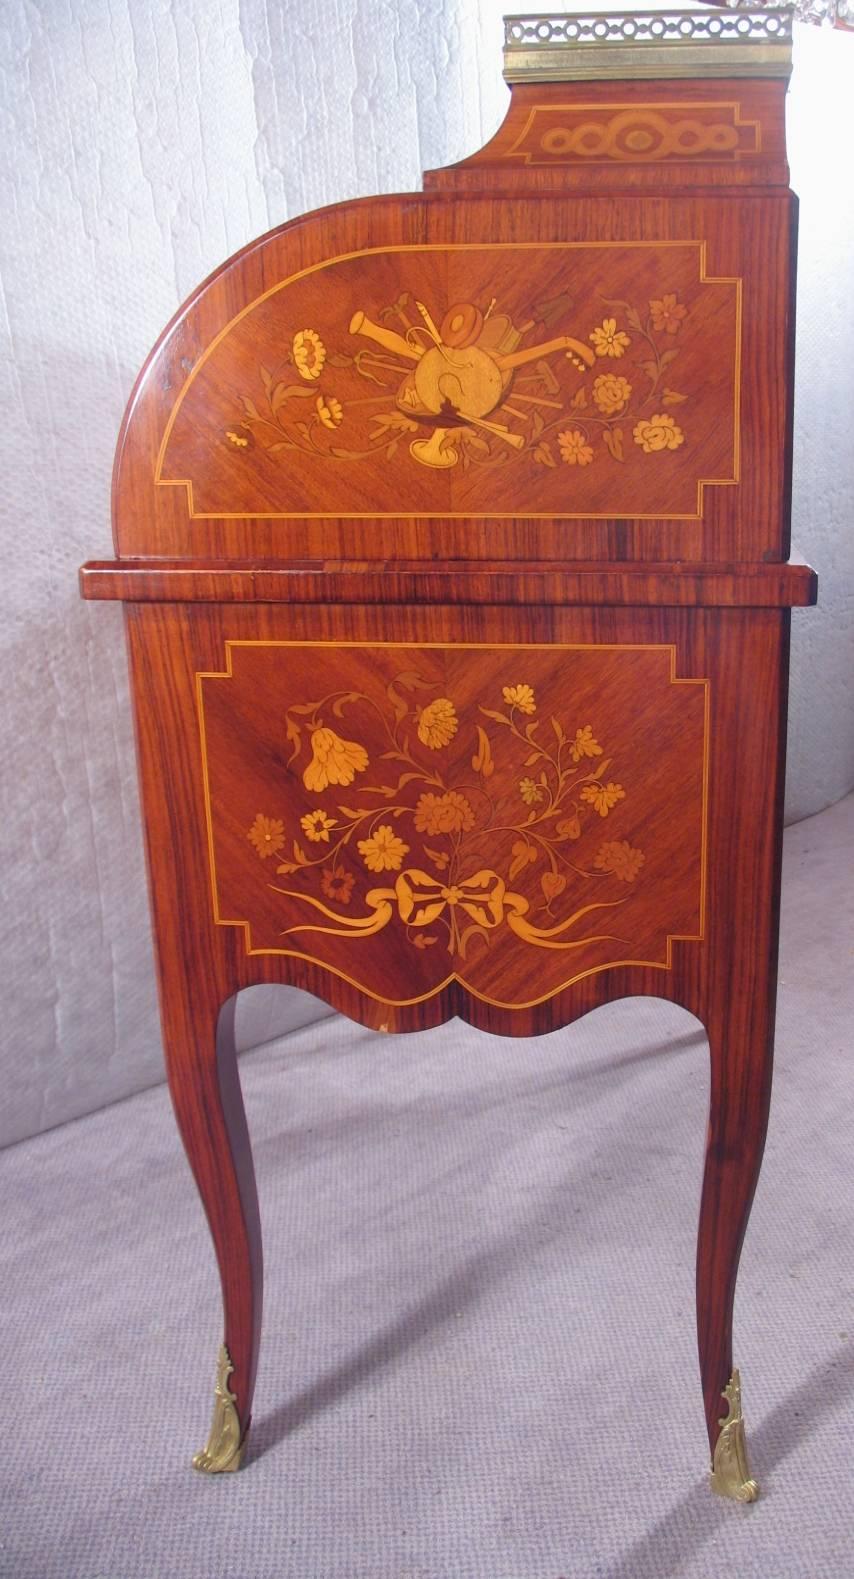 Exquisite roll top secrétaire with beautiful flower marquetry in walnut, kingwood and rosewood. The secretaire will be directly shipped from Germany. Shipping costs to Boston are included.